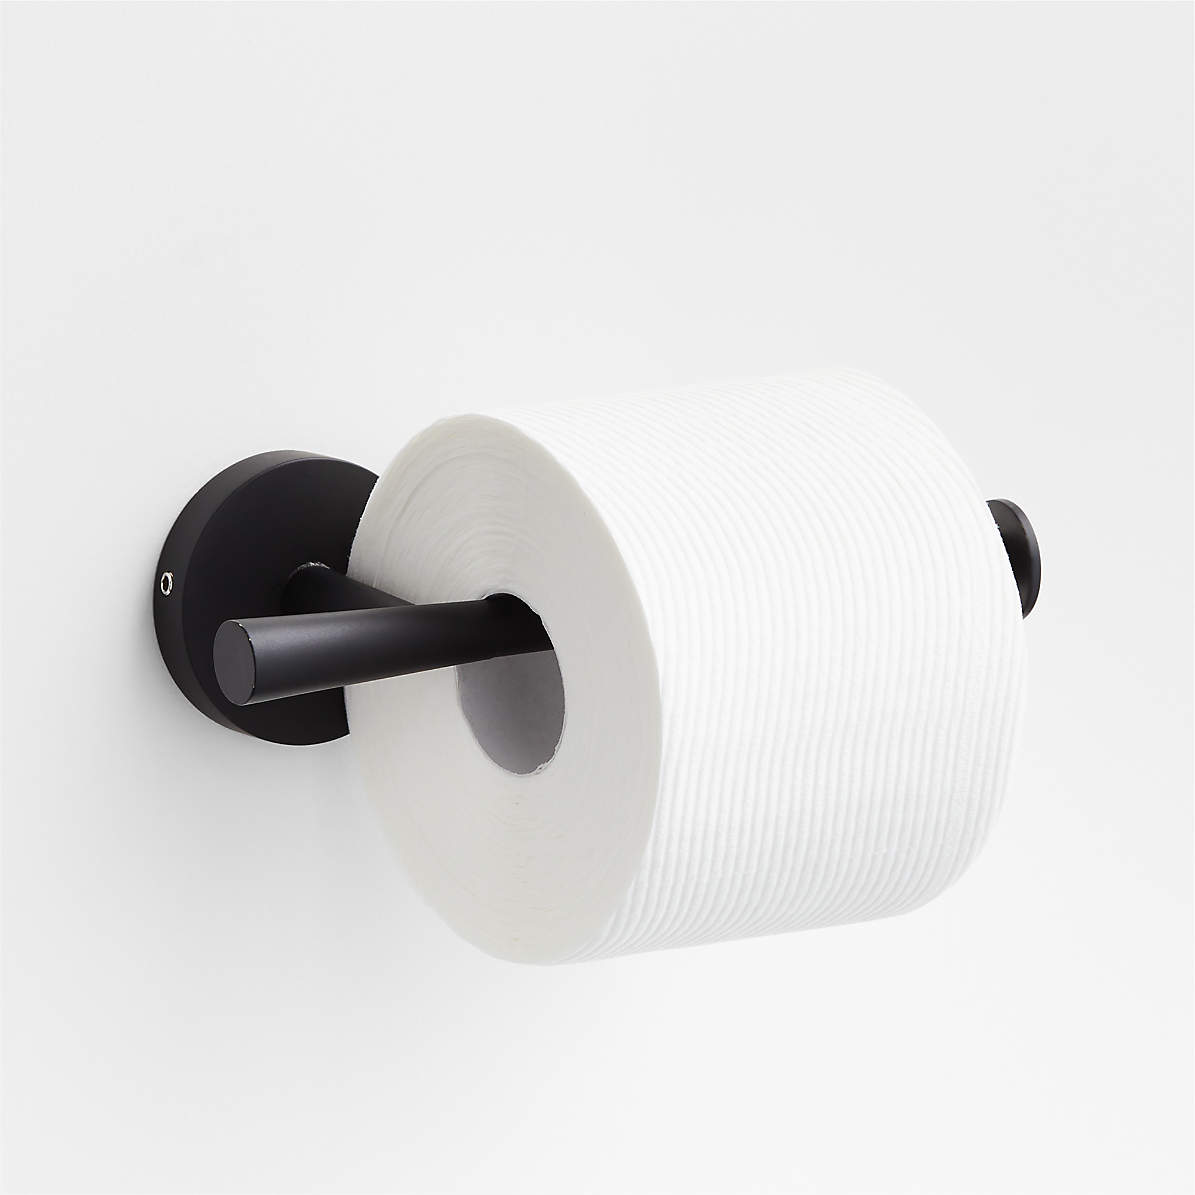 Nicolo Knurled Black Wall Mount Toilet Paper Holder + Reviews